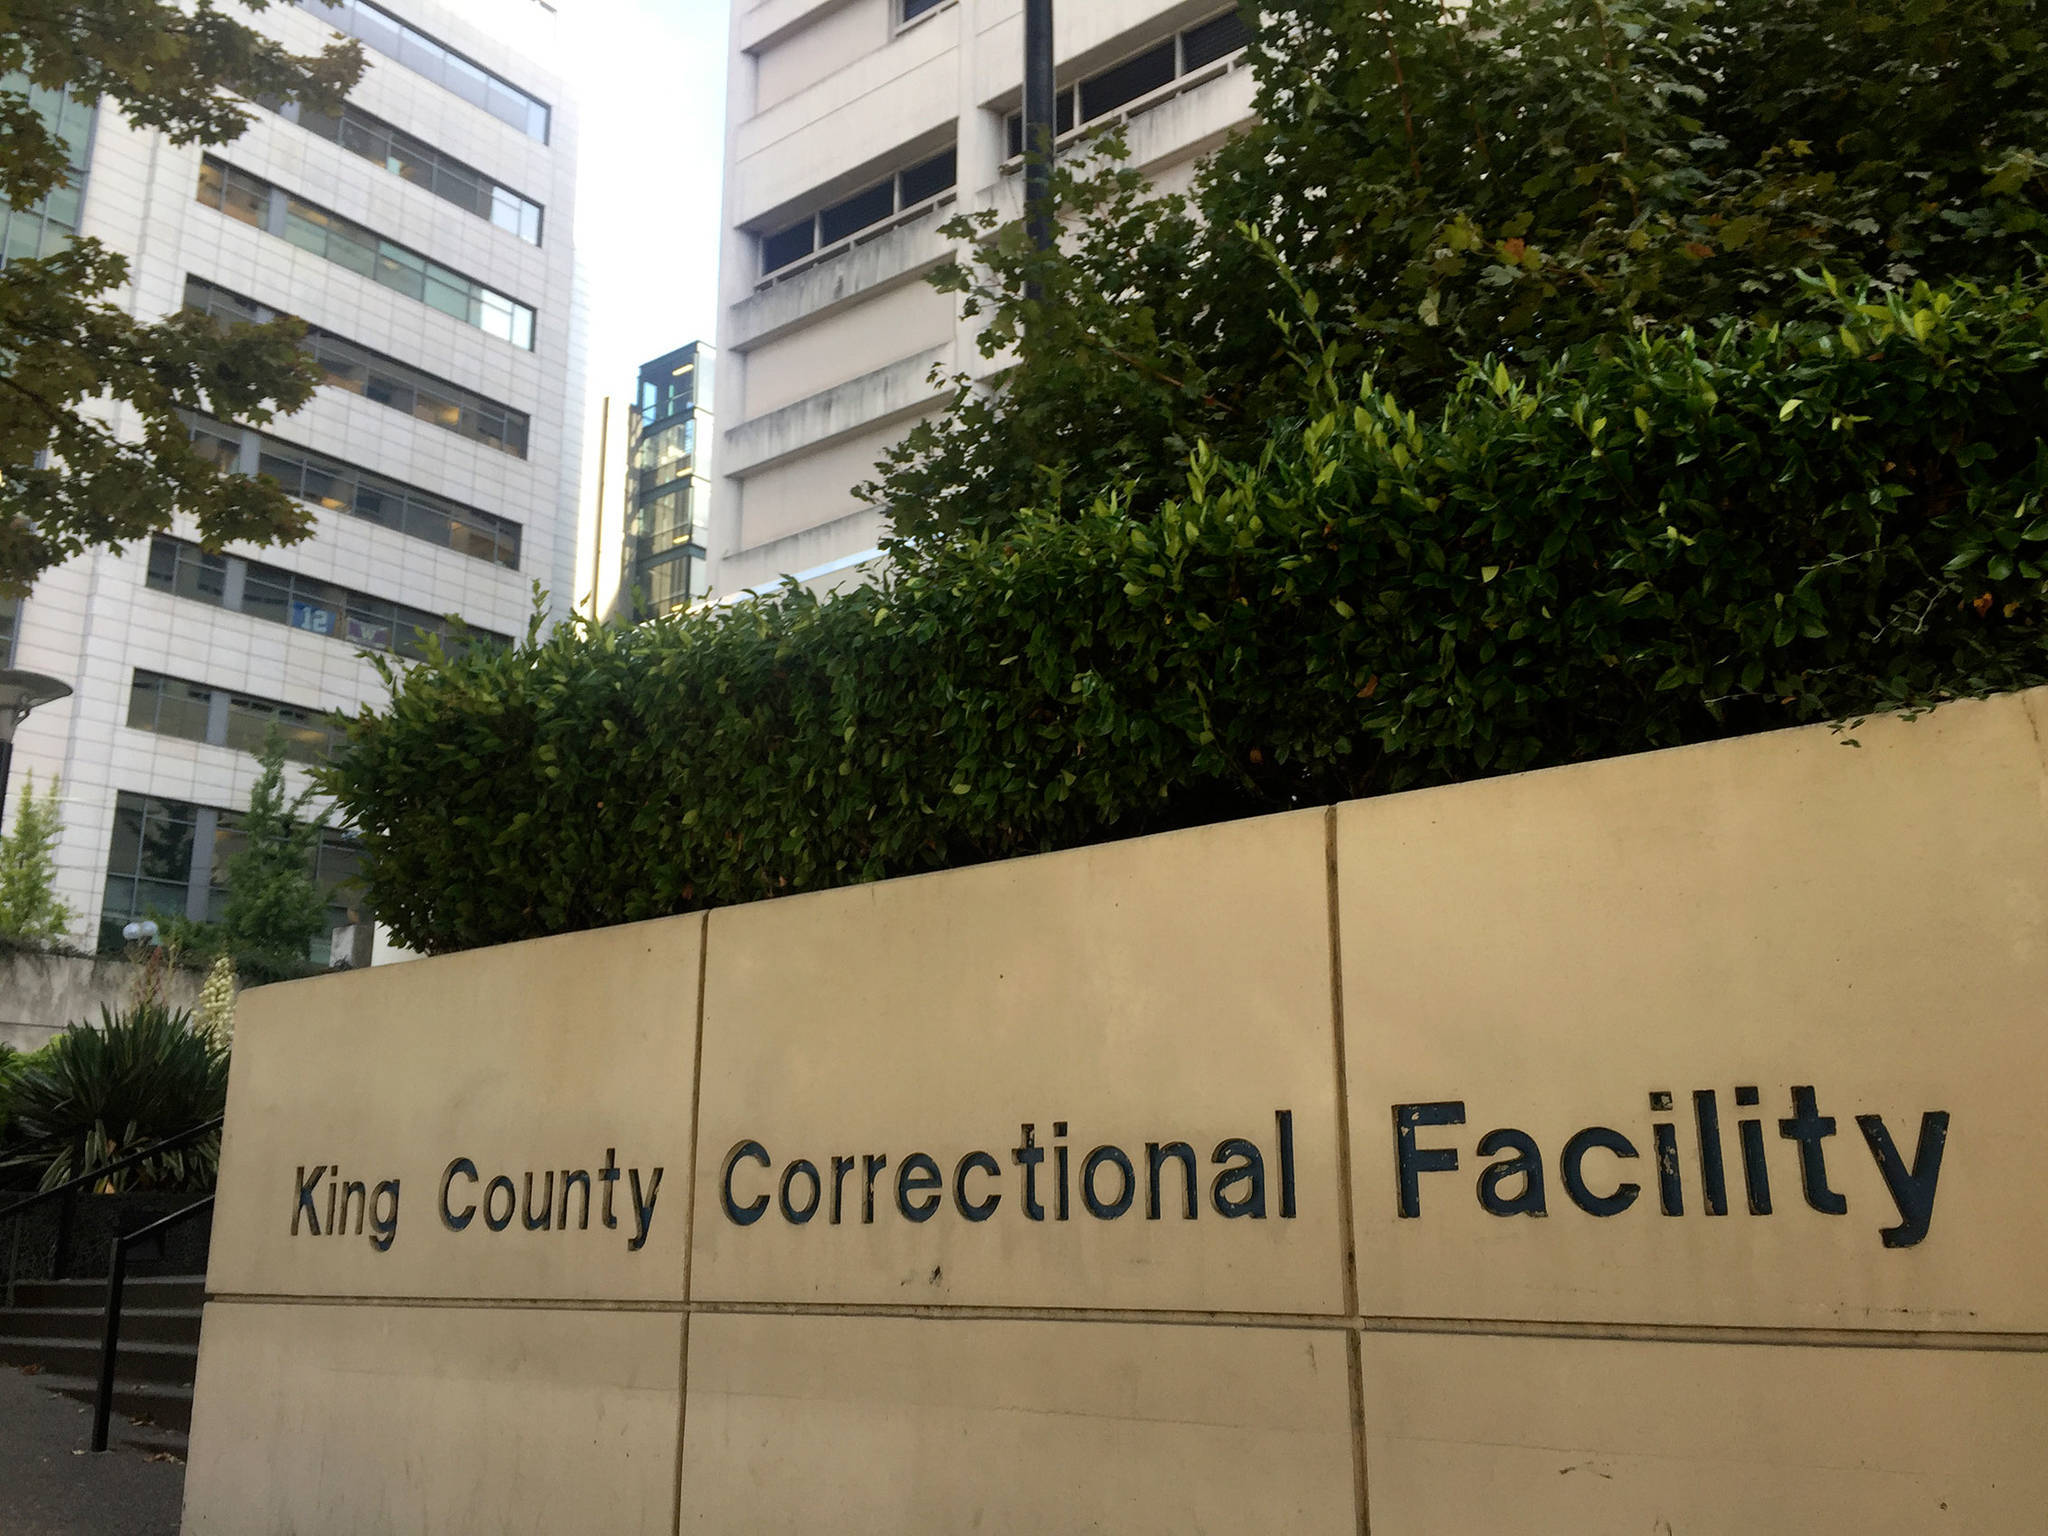 King County Correctional Facility is located at 500 5th Ave., Seattle. File photo